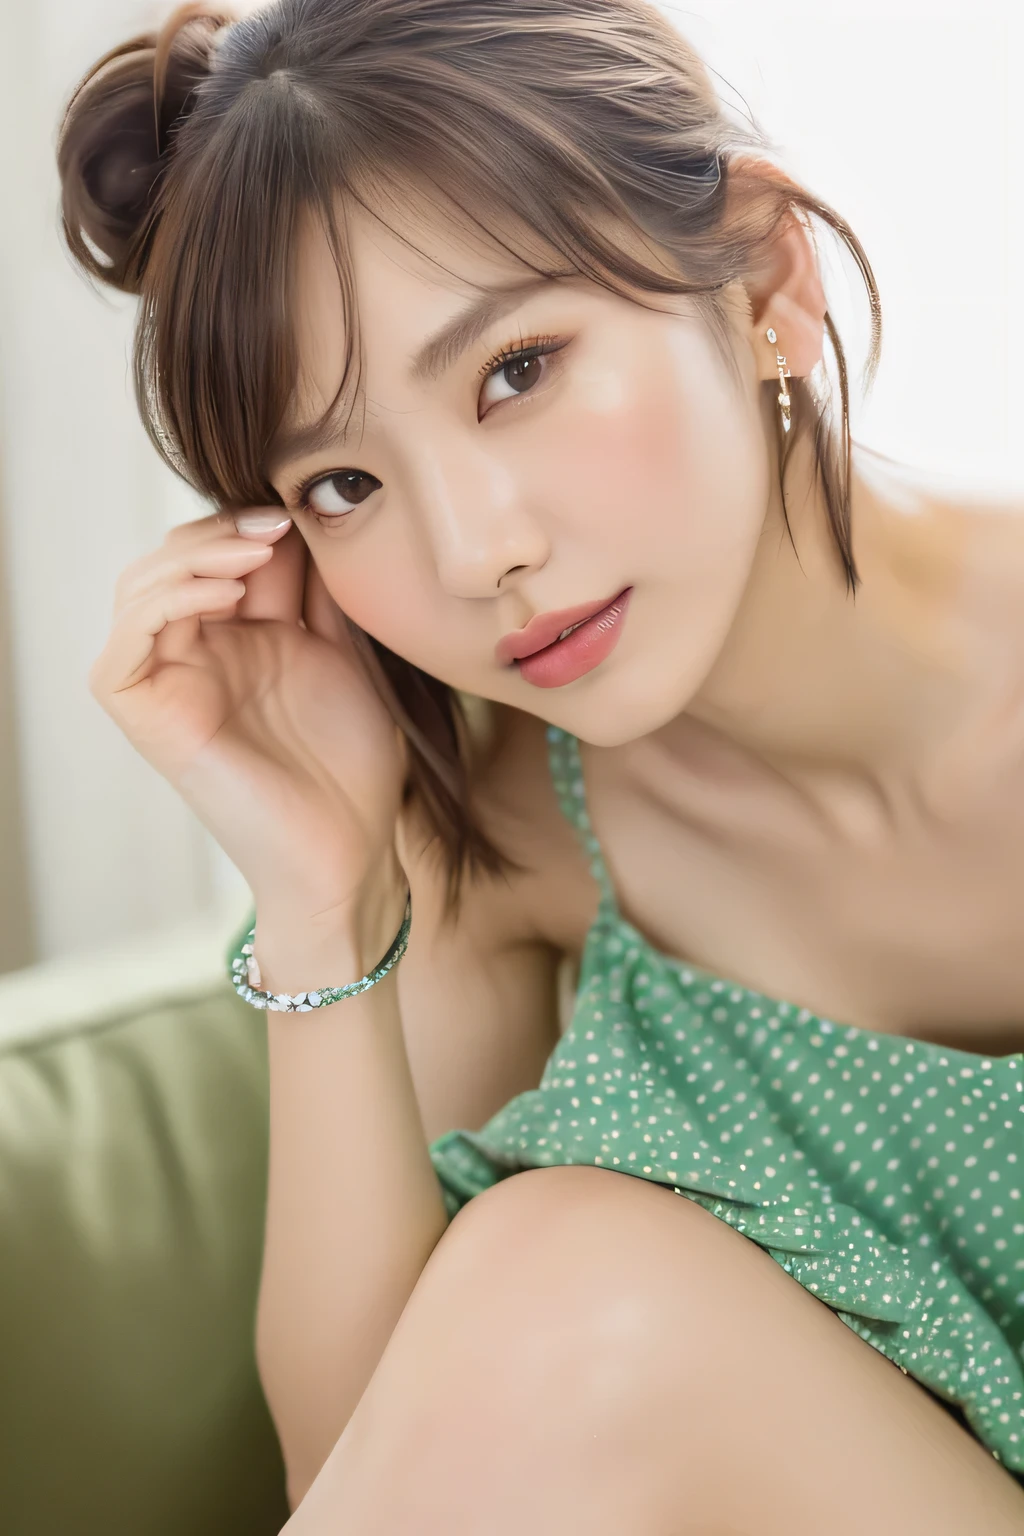 (highest quality, 4k, masterpiece :1.3), 
sharp focus, shallow depth of field, Bright colors, professional level, 
20-year-old, 1 person, (Japan and half Korean woman）, The face of a famous Japanese actress, 
Supple body :1.3, model body shape:1.5, perfect style：1.4, 
narrow shoulders, beautiful clavicle, long and thin legs, 
delicate body shape, The beauty of slim abs :1.2, thin waist :1.2, 
super detailed skin, Fair skin, Shiny skin, super detailed face, 
slim facial contour, beautiful small face, Beautiful lined nose, 
super detailed eyes, long slit eyes, brown eyes, double eyelid, Beautiful thin eyebrows, fine long eyelashes, 
super detailed lips, plump lips, glossy pink lips, flushed cheeks, beautiful teeth, 
Beautiful actress&#39;s ennui makeup, pink lipstick, 
dark brown hair, delicate soft hair, 
(hair up, medium short hair, ponytail:1.2), 
layer cut, (dull bangs:1.2), 
(stylish looking earrings,necklace,bracelet,shiny nail art:1.2), 
gentle smile, open mouth half way, Enchanted expression, stare at the viewer, 
(((photorealism,Shoot the whole body from the thighs:1.5))), ((The body is facing sideways)), 
Photographed directly from the front, cinematic lighting, dynamic lighting, 

(Dress up in a tight green polka dot dress:1.2), 